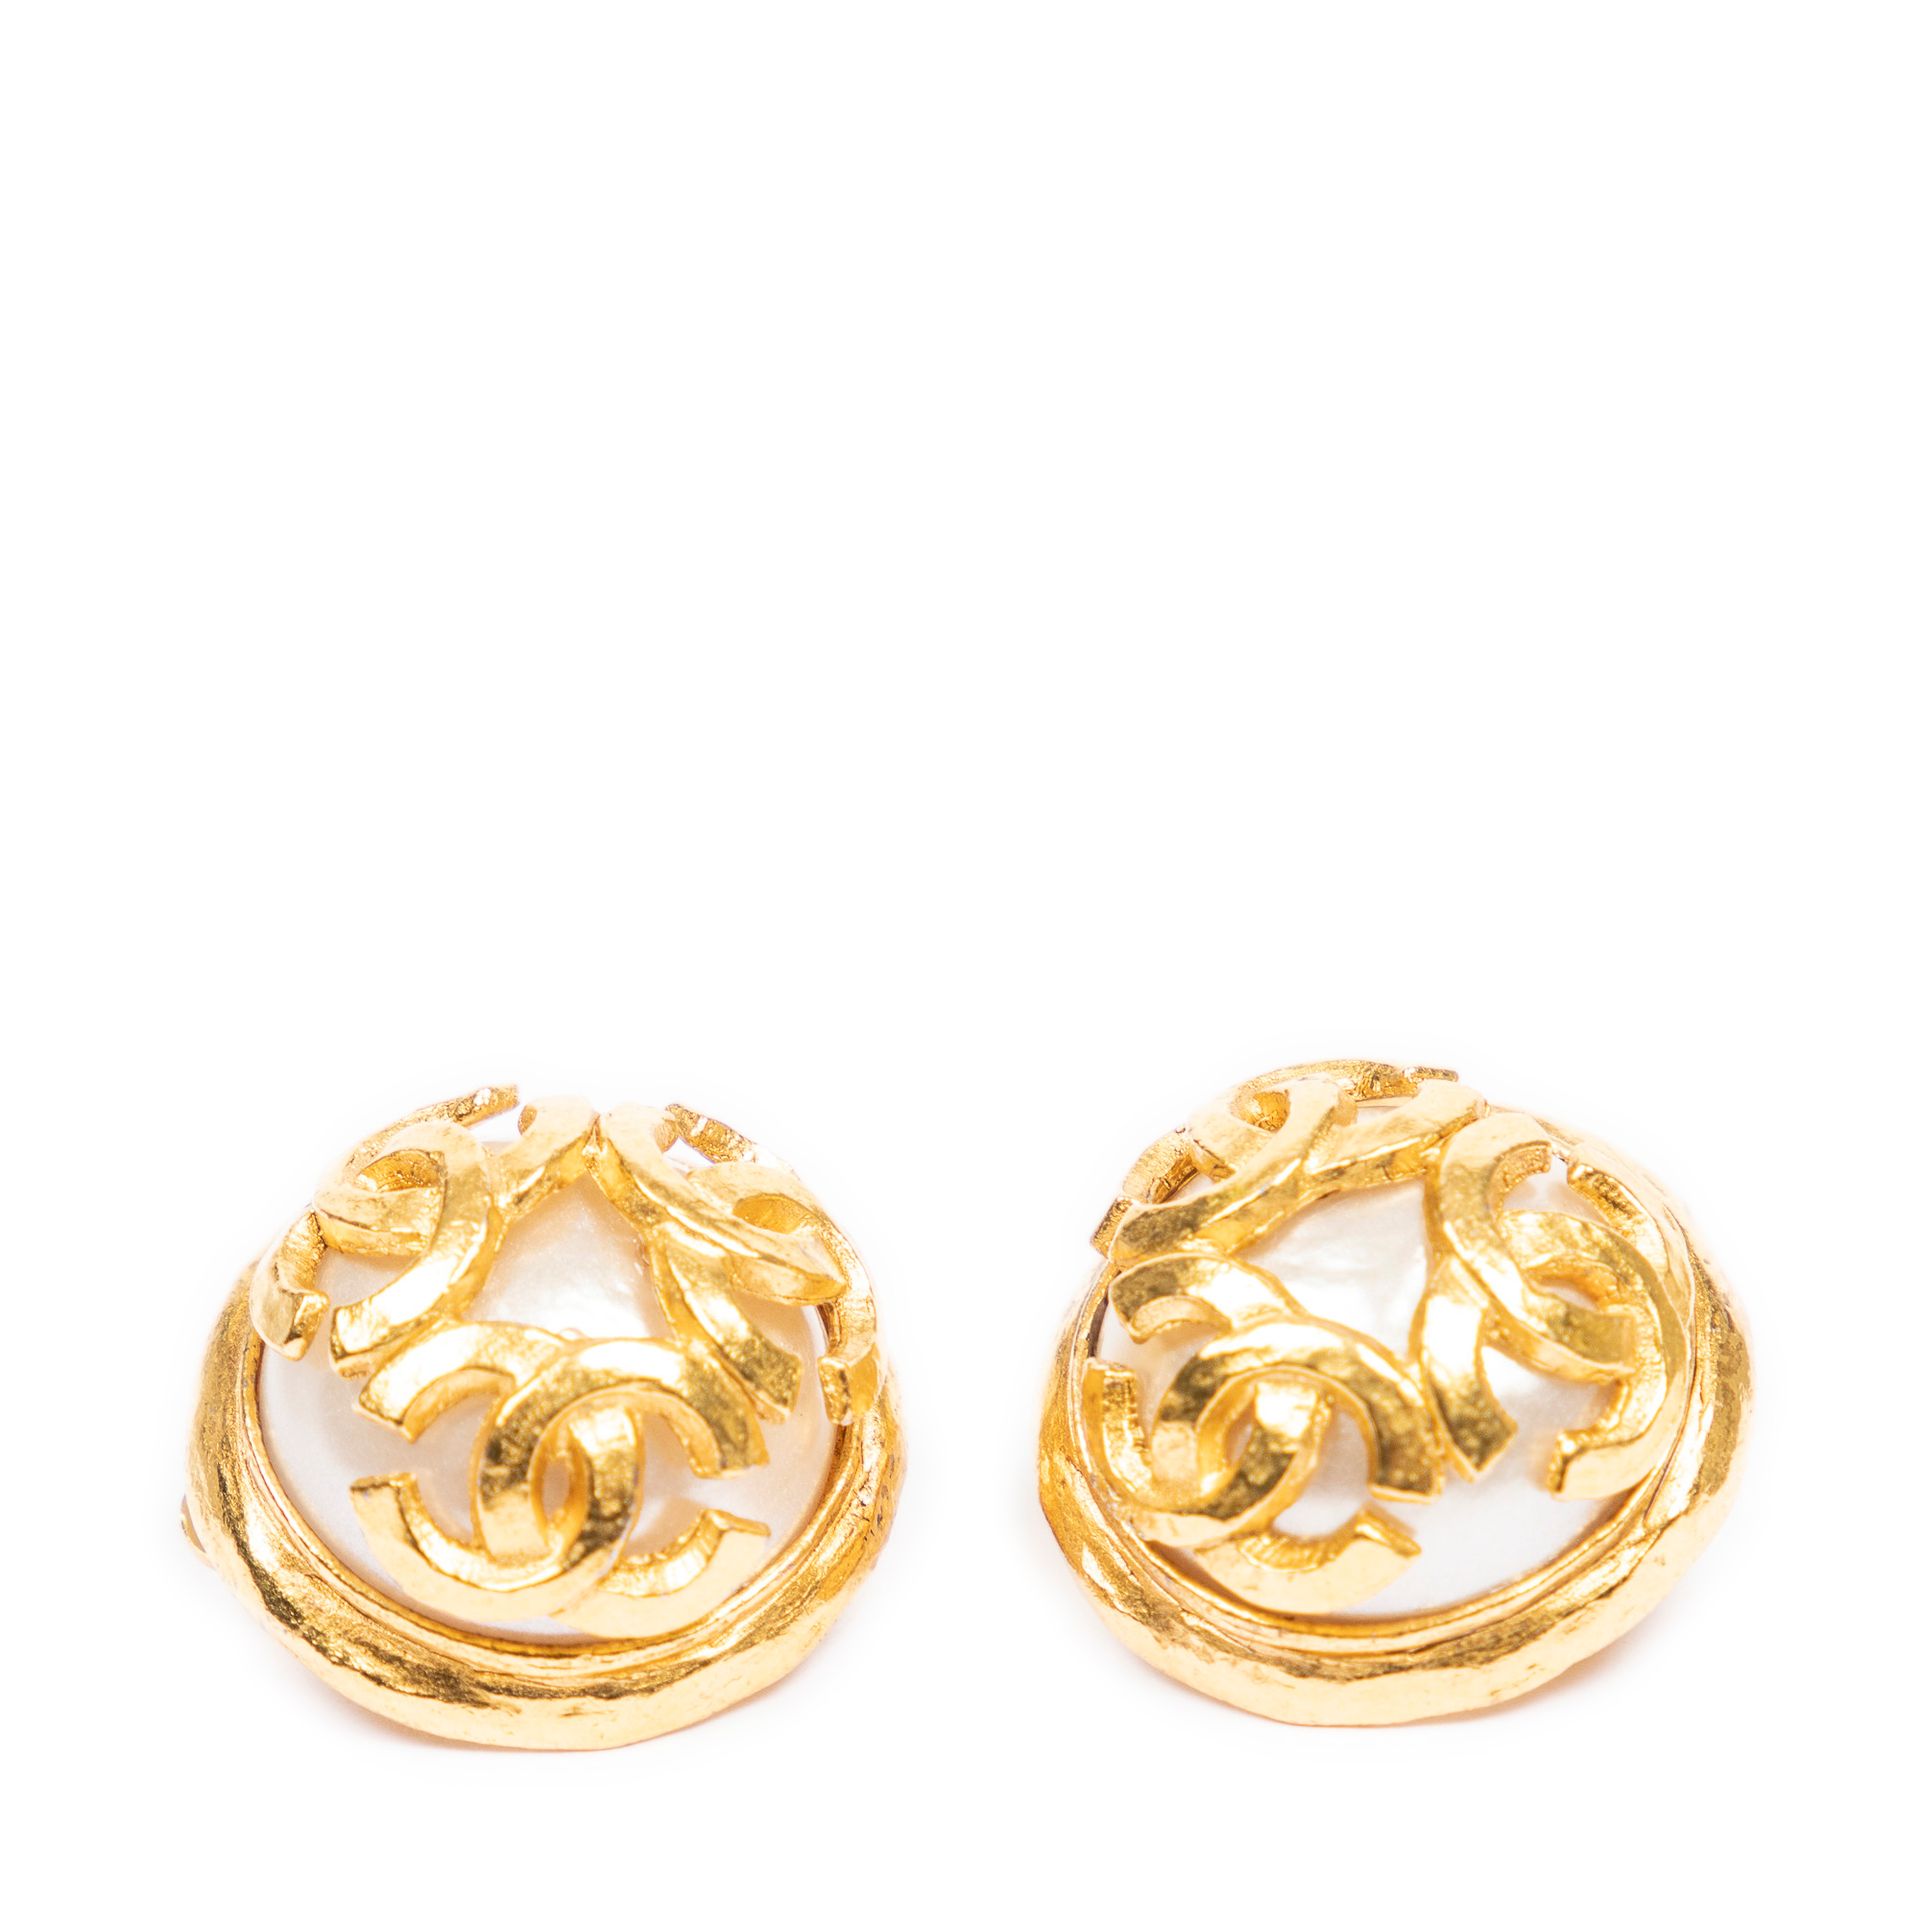 Chanel CHANEL - Pair of ear clips in gold-plated metal, each clip adorned in its&hellip;